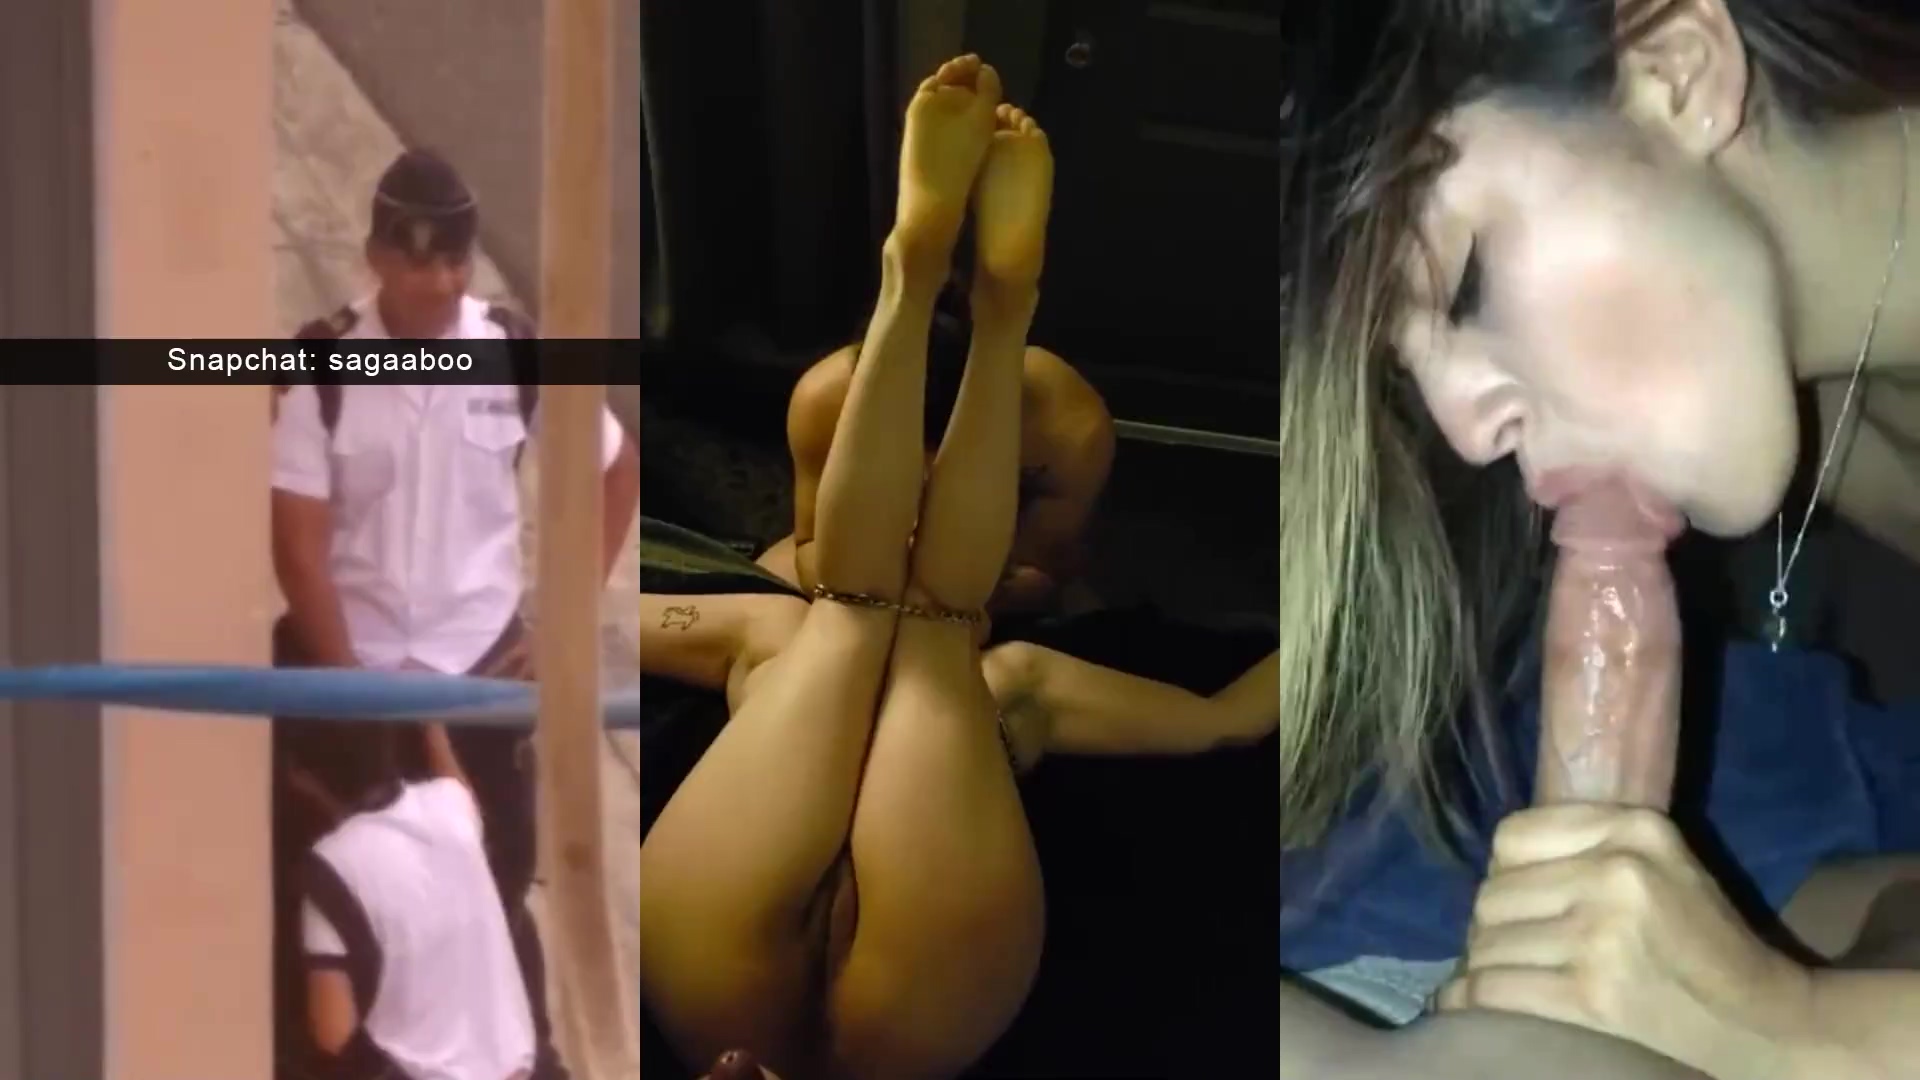 Snapchat compilations with teens switching between different sex scenes pic